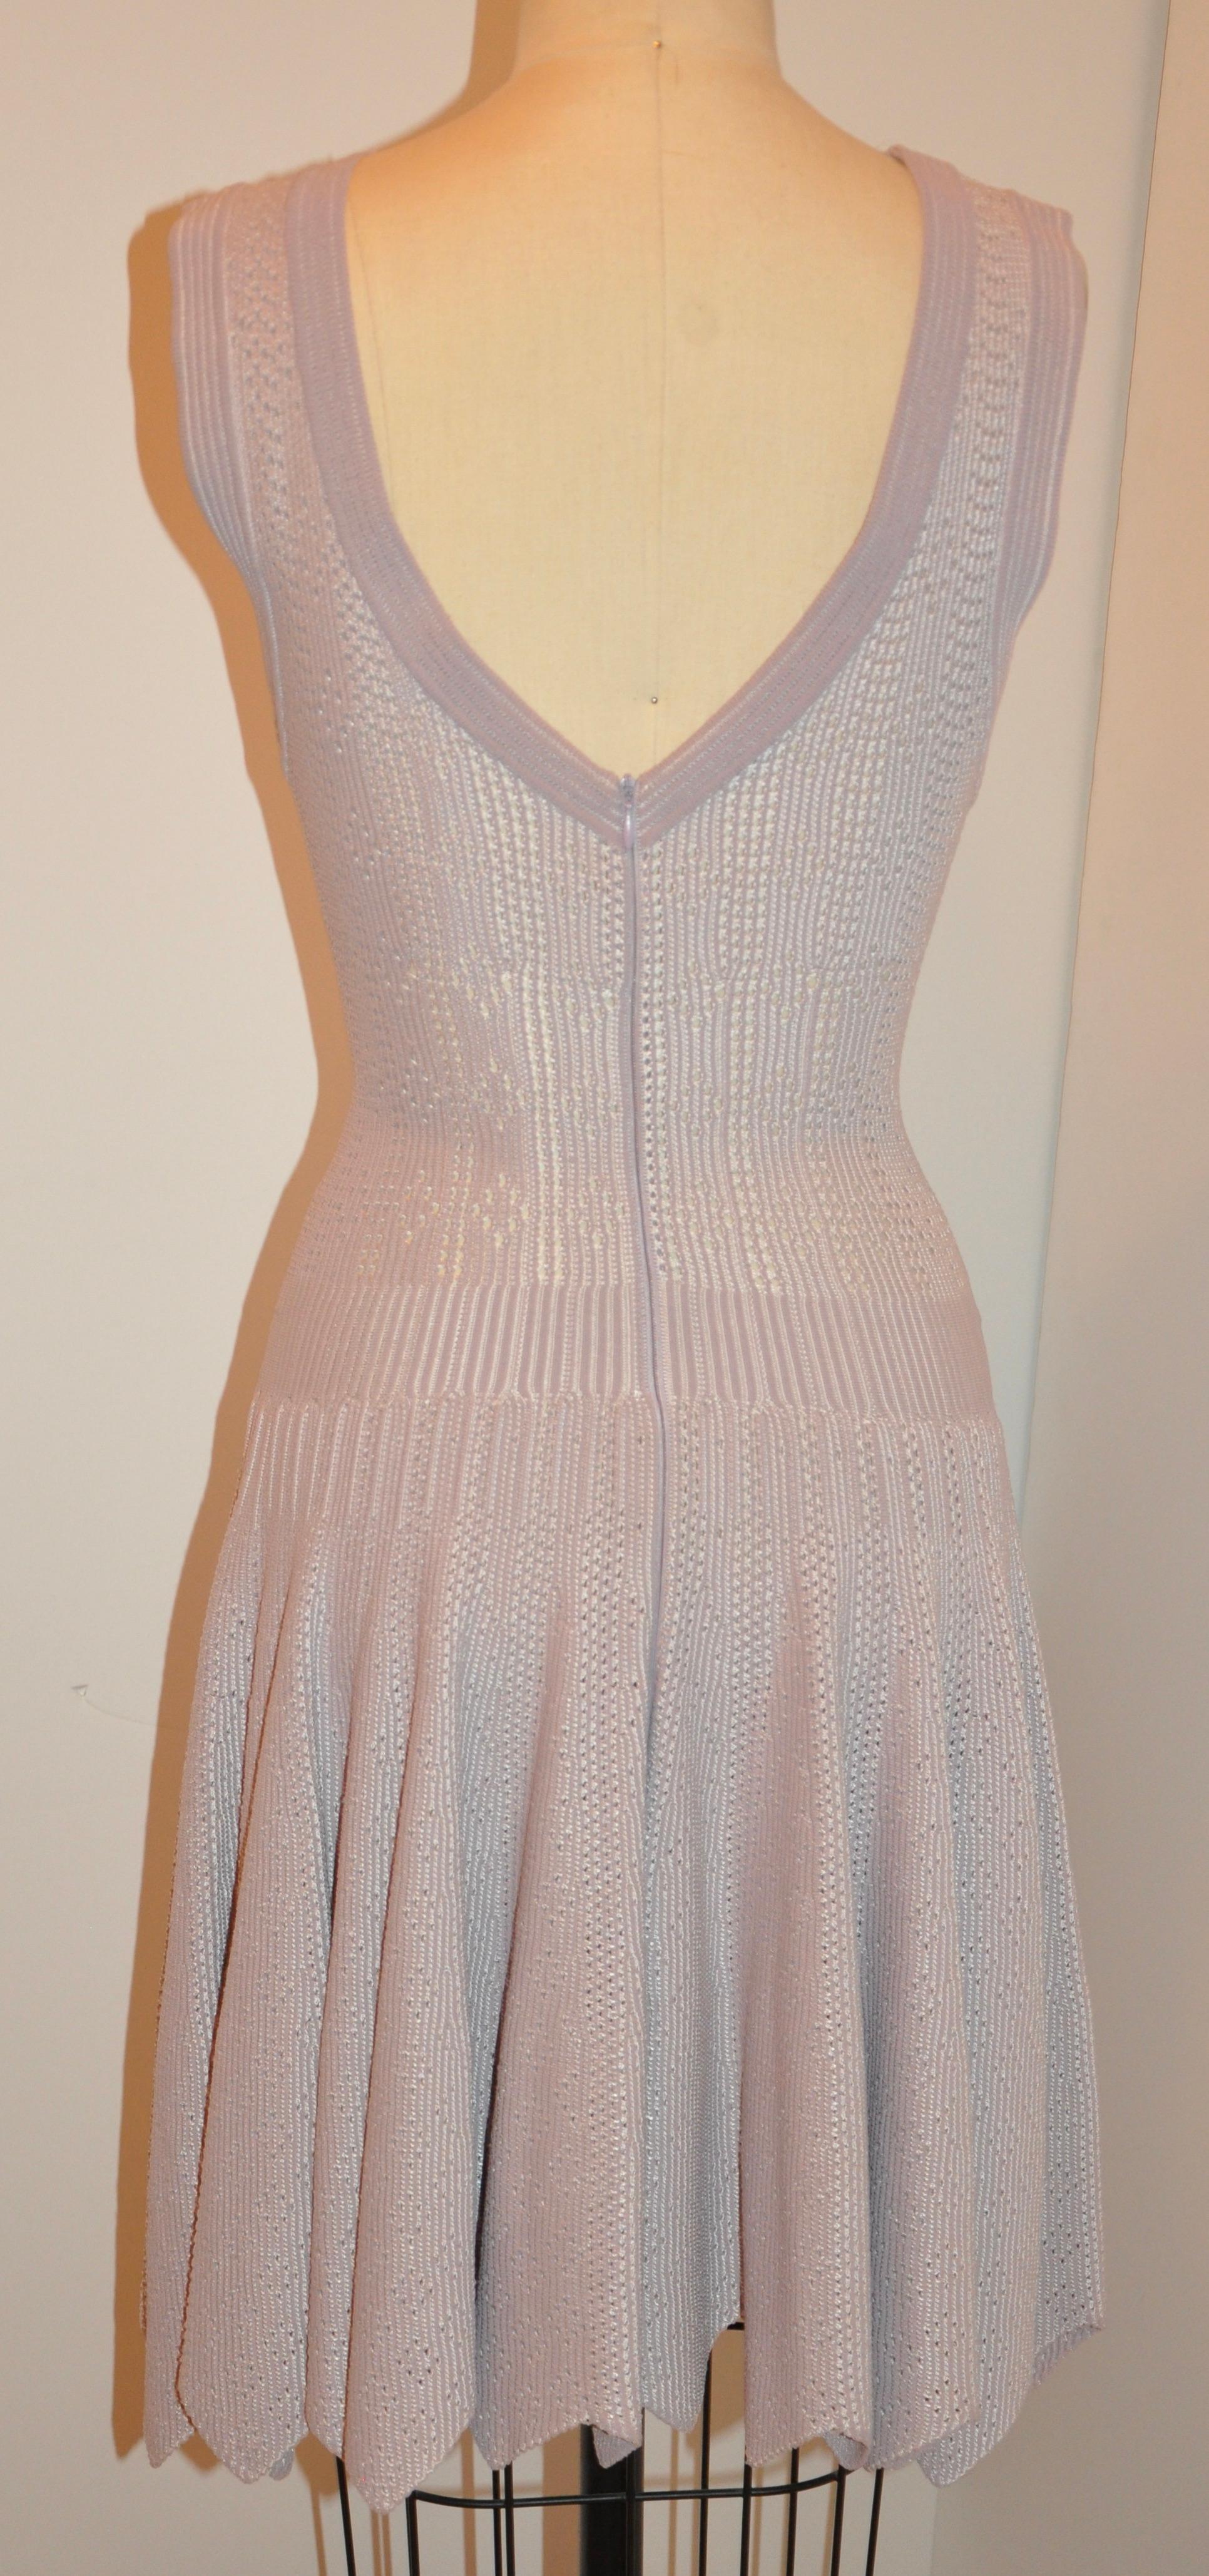 Rare Azzedine Alaia Signature Fawn-Hue Form-Fitting Eyelet Accented Swing Dress For Sale 15